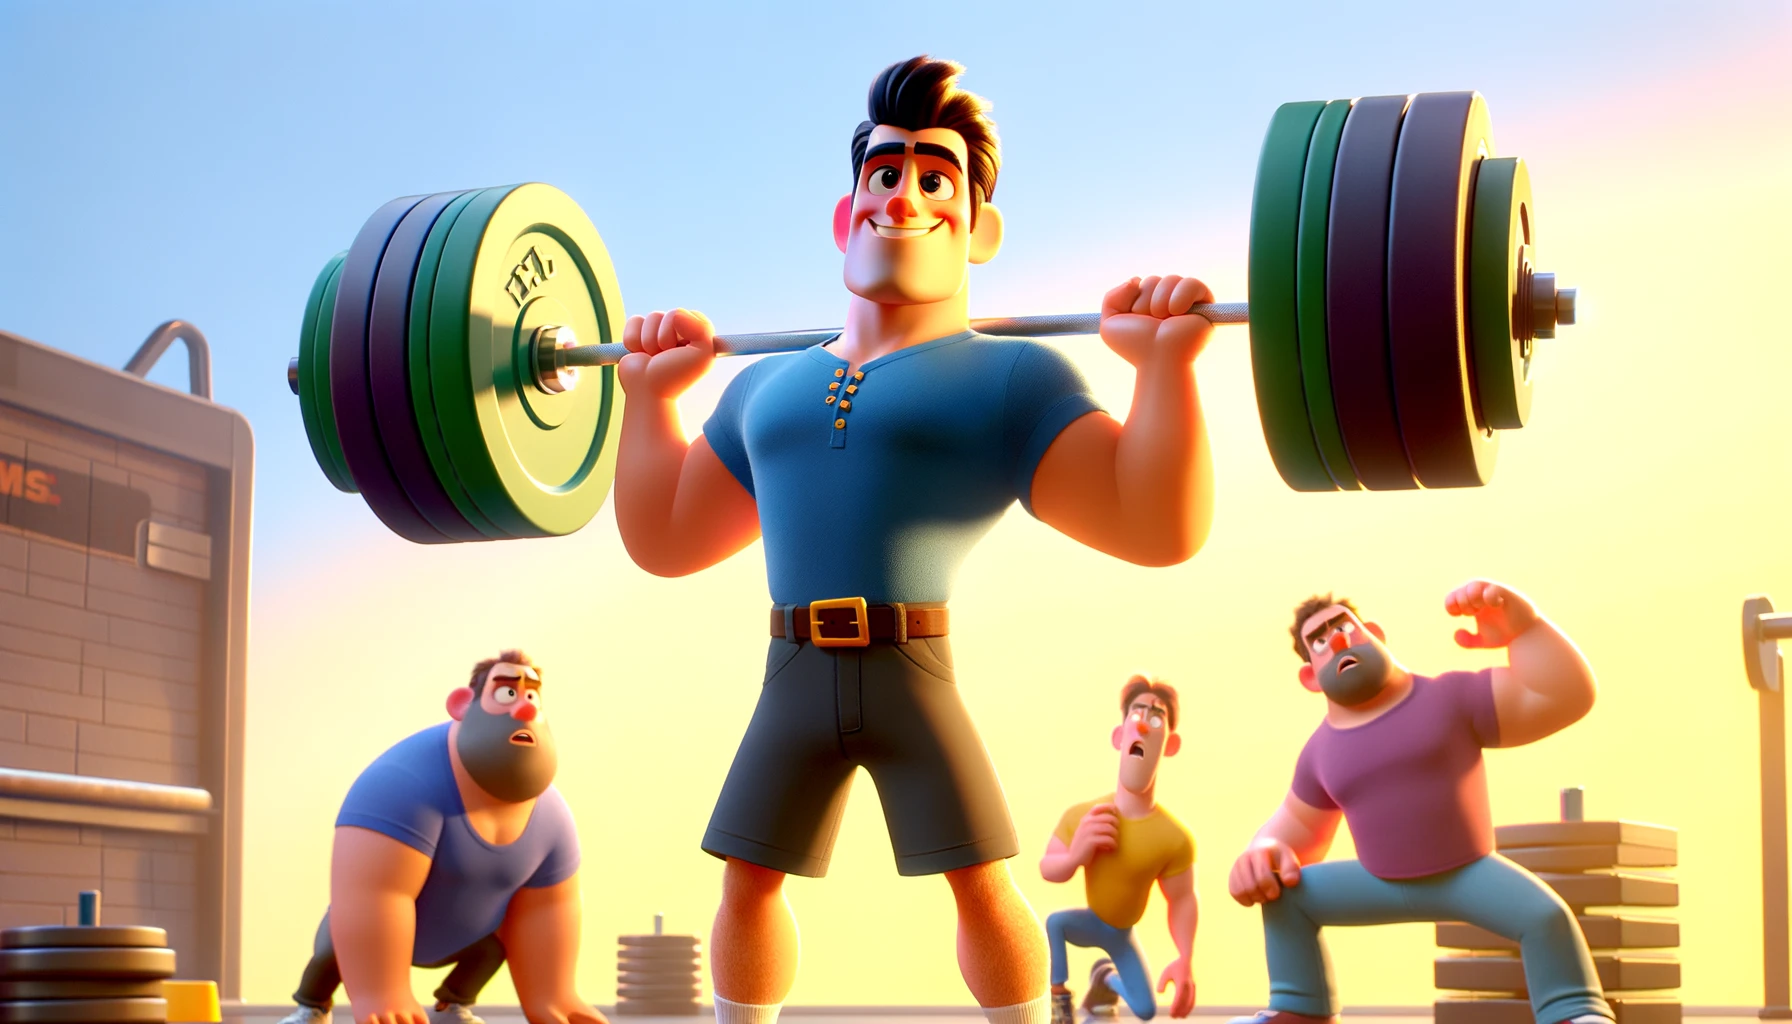 A Pixar-style cartoon scene, in landscape orientation, featuring a central character effortlessly lifting heavy weights with a confident smile. The character's ease and casualness in lifting should epitomize the expression "No Sweat." In the background, other characters struggle to lift similar weights. The overall atmosphere should be fun and bright, using vivid colors to enhance the cartoonish and lively vibe of the scene.